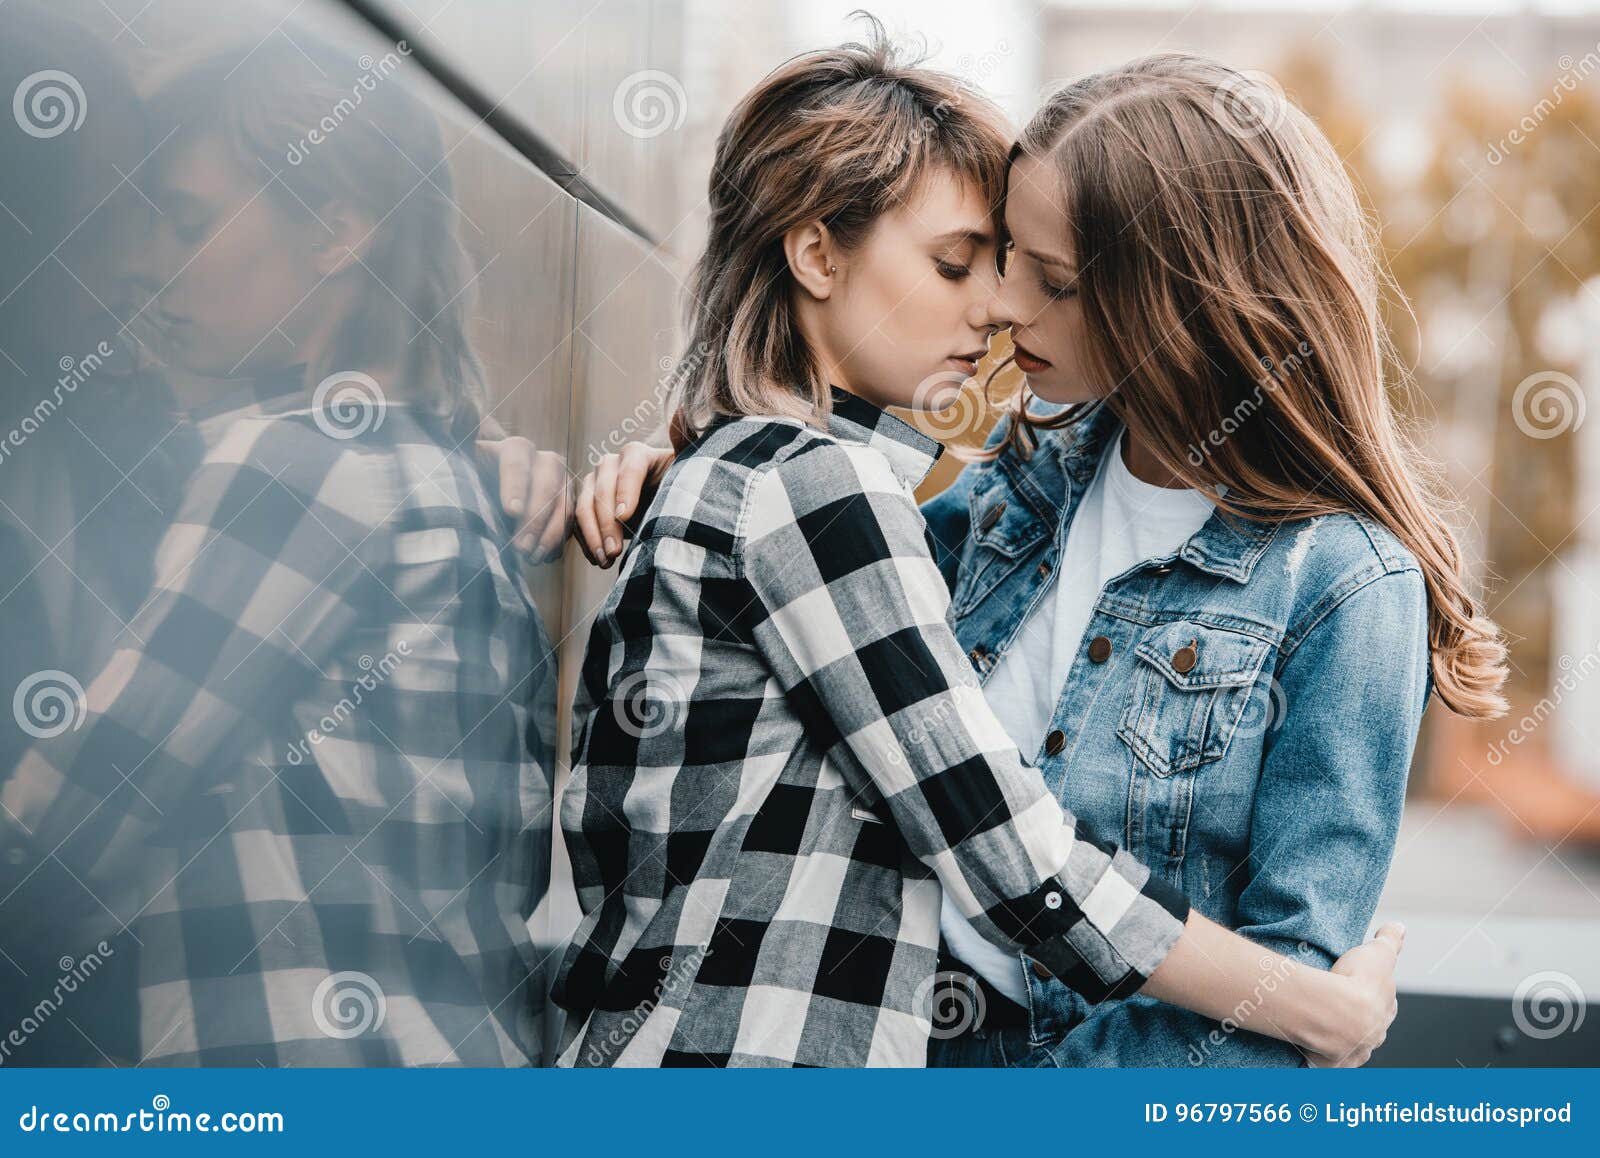 lesbians girls making out